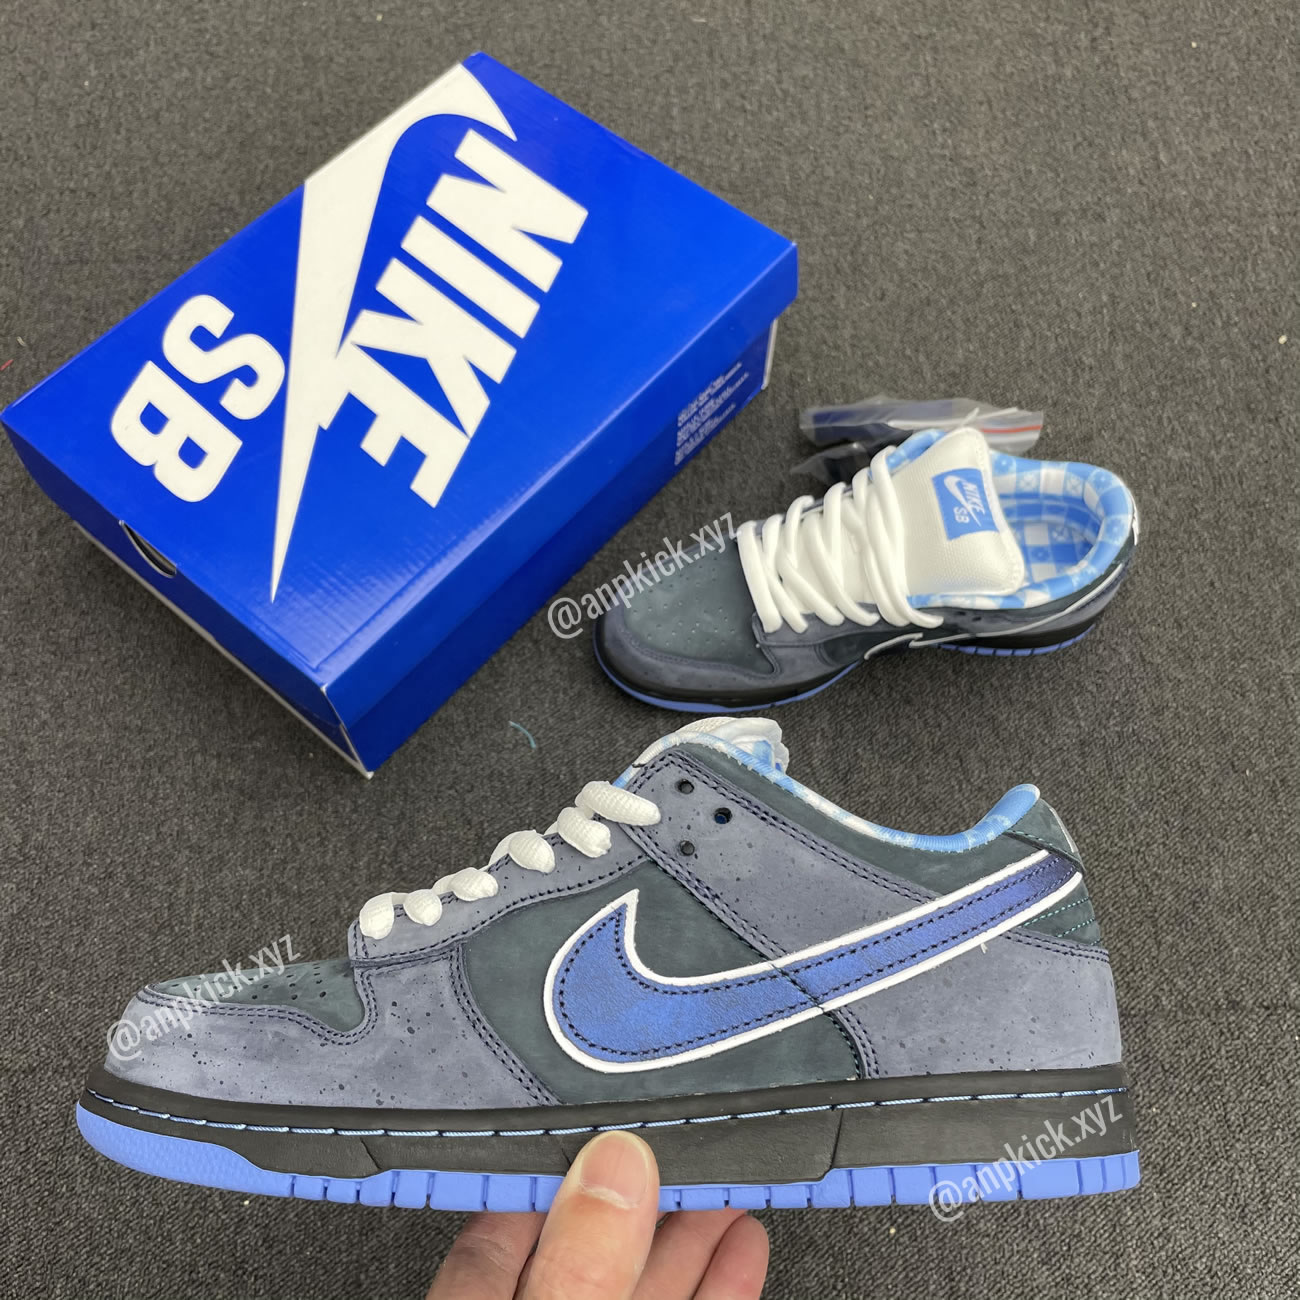 Anpkick Nike Sb Dunk Low Concepts Bluelobster 313170 342 (2) - newkick.org